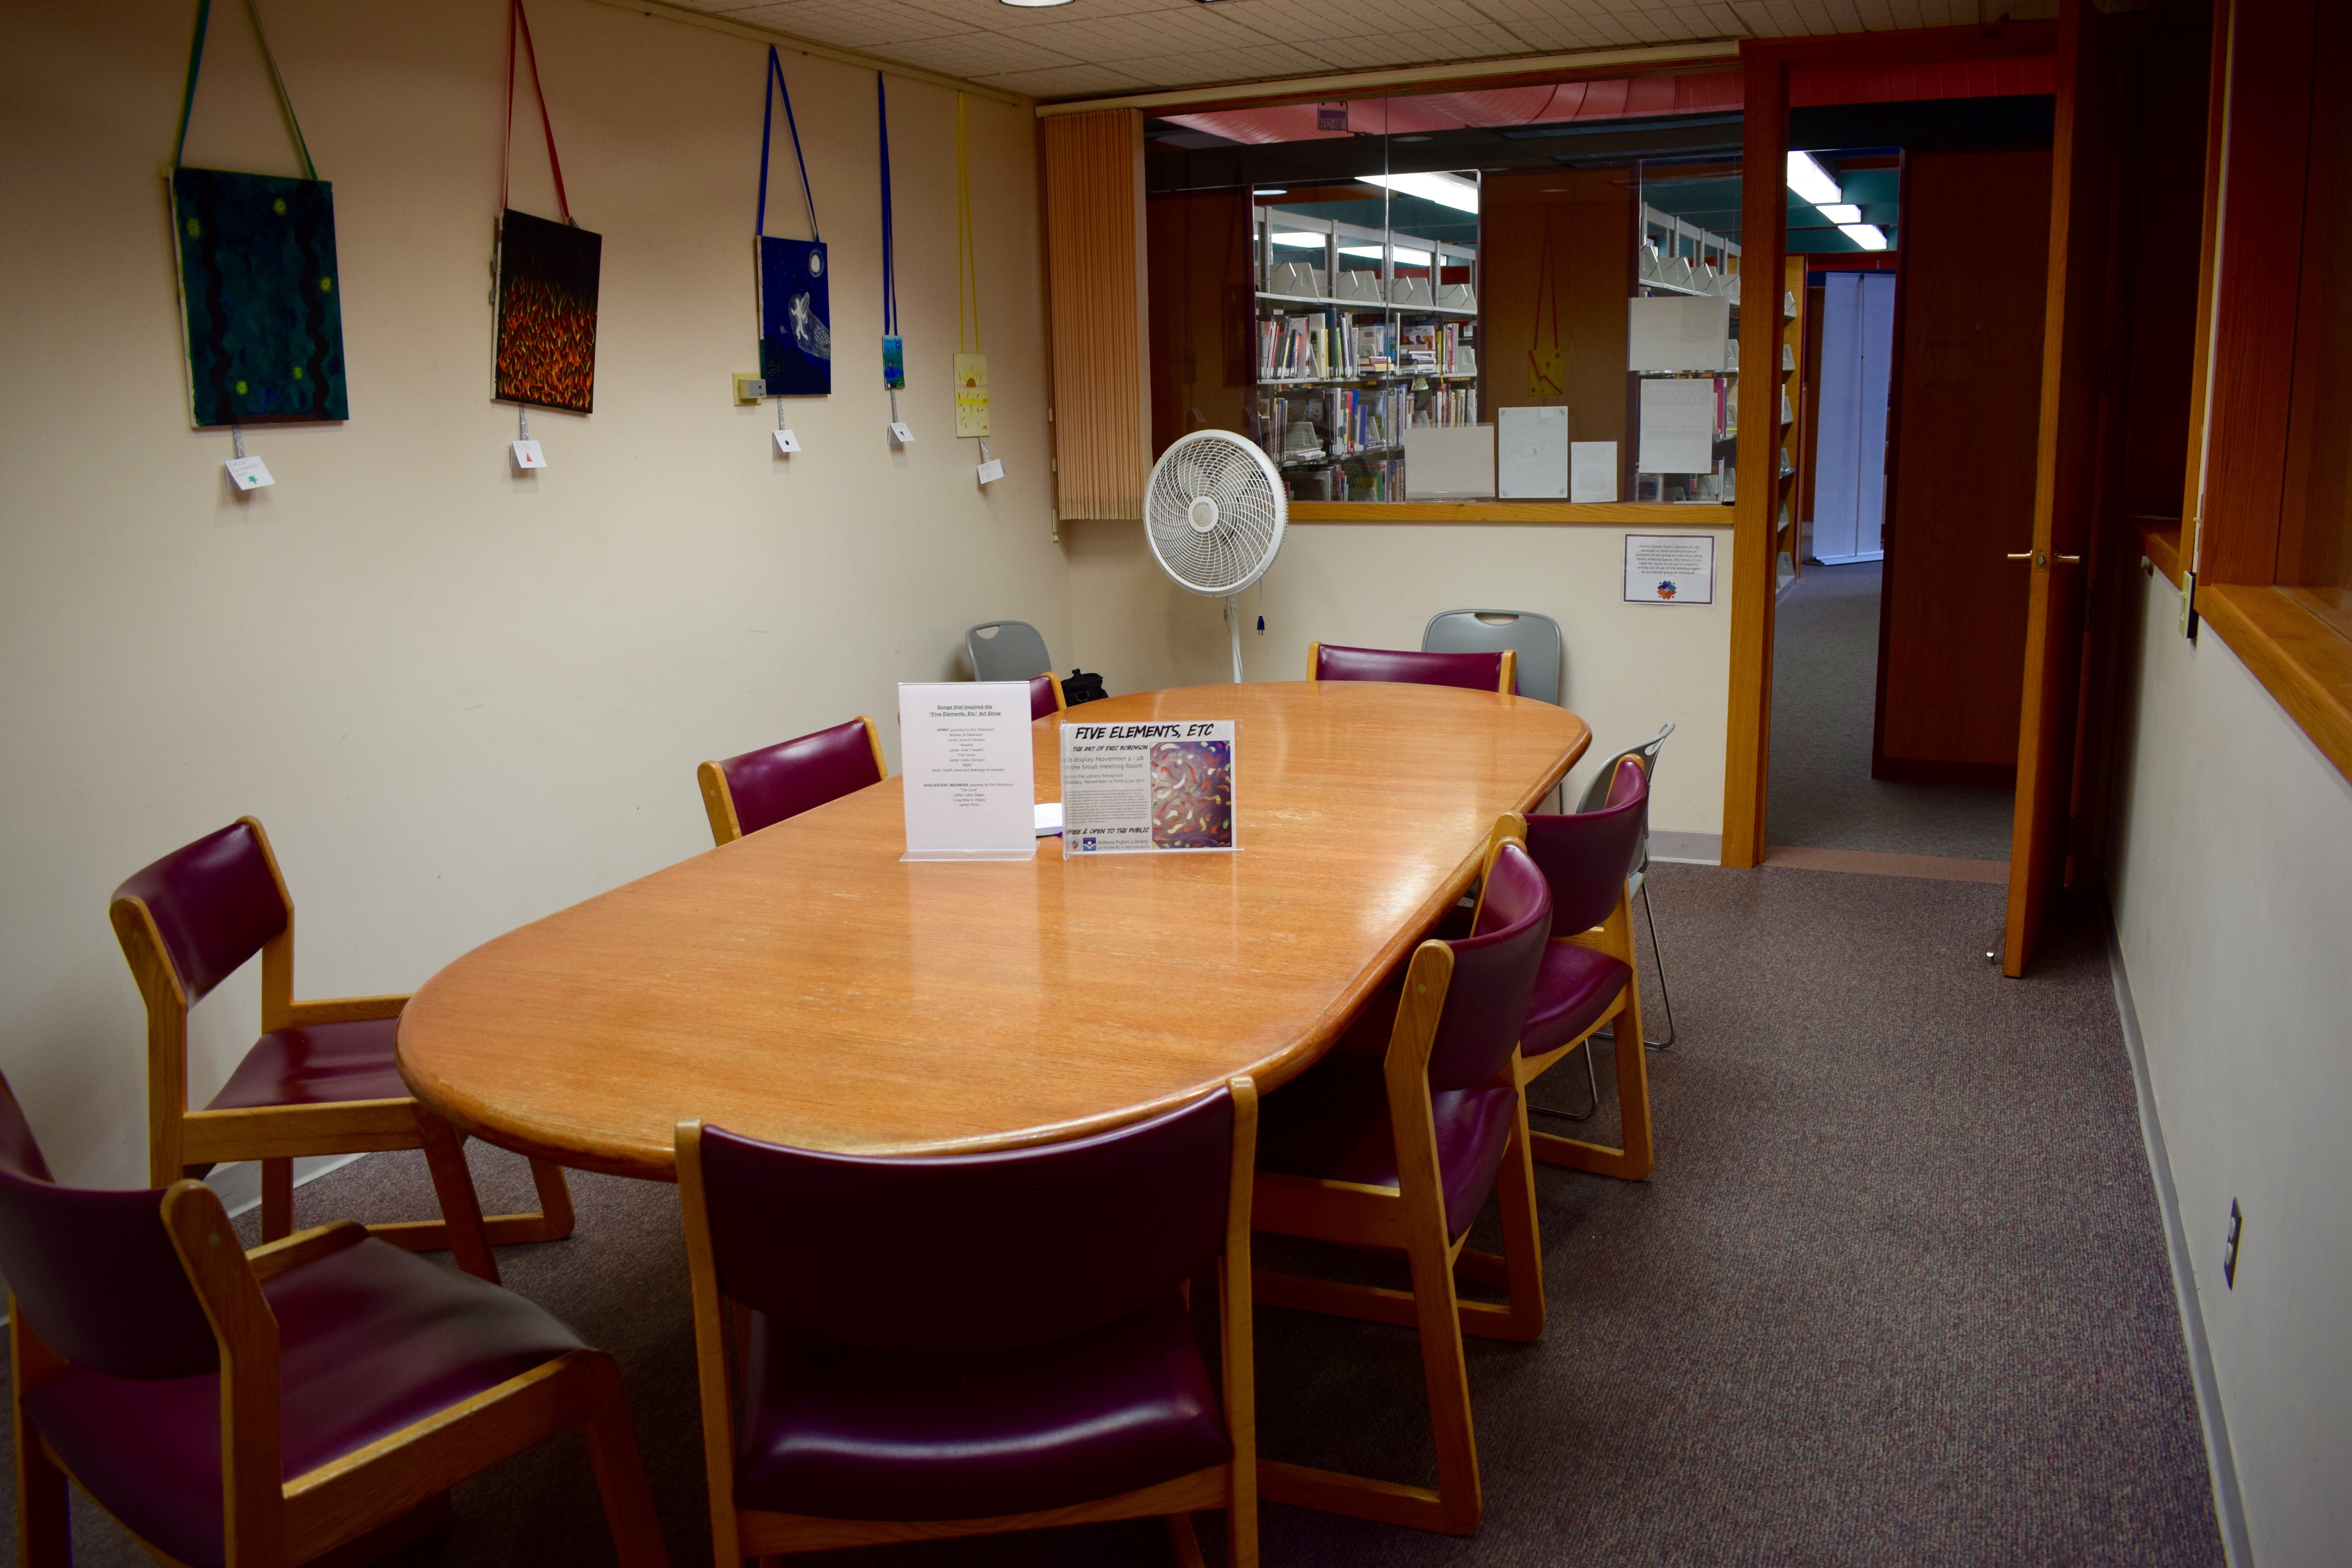 Small meeting room at the Athens Public Library, including a large oval table with chairs. 